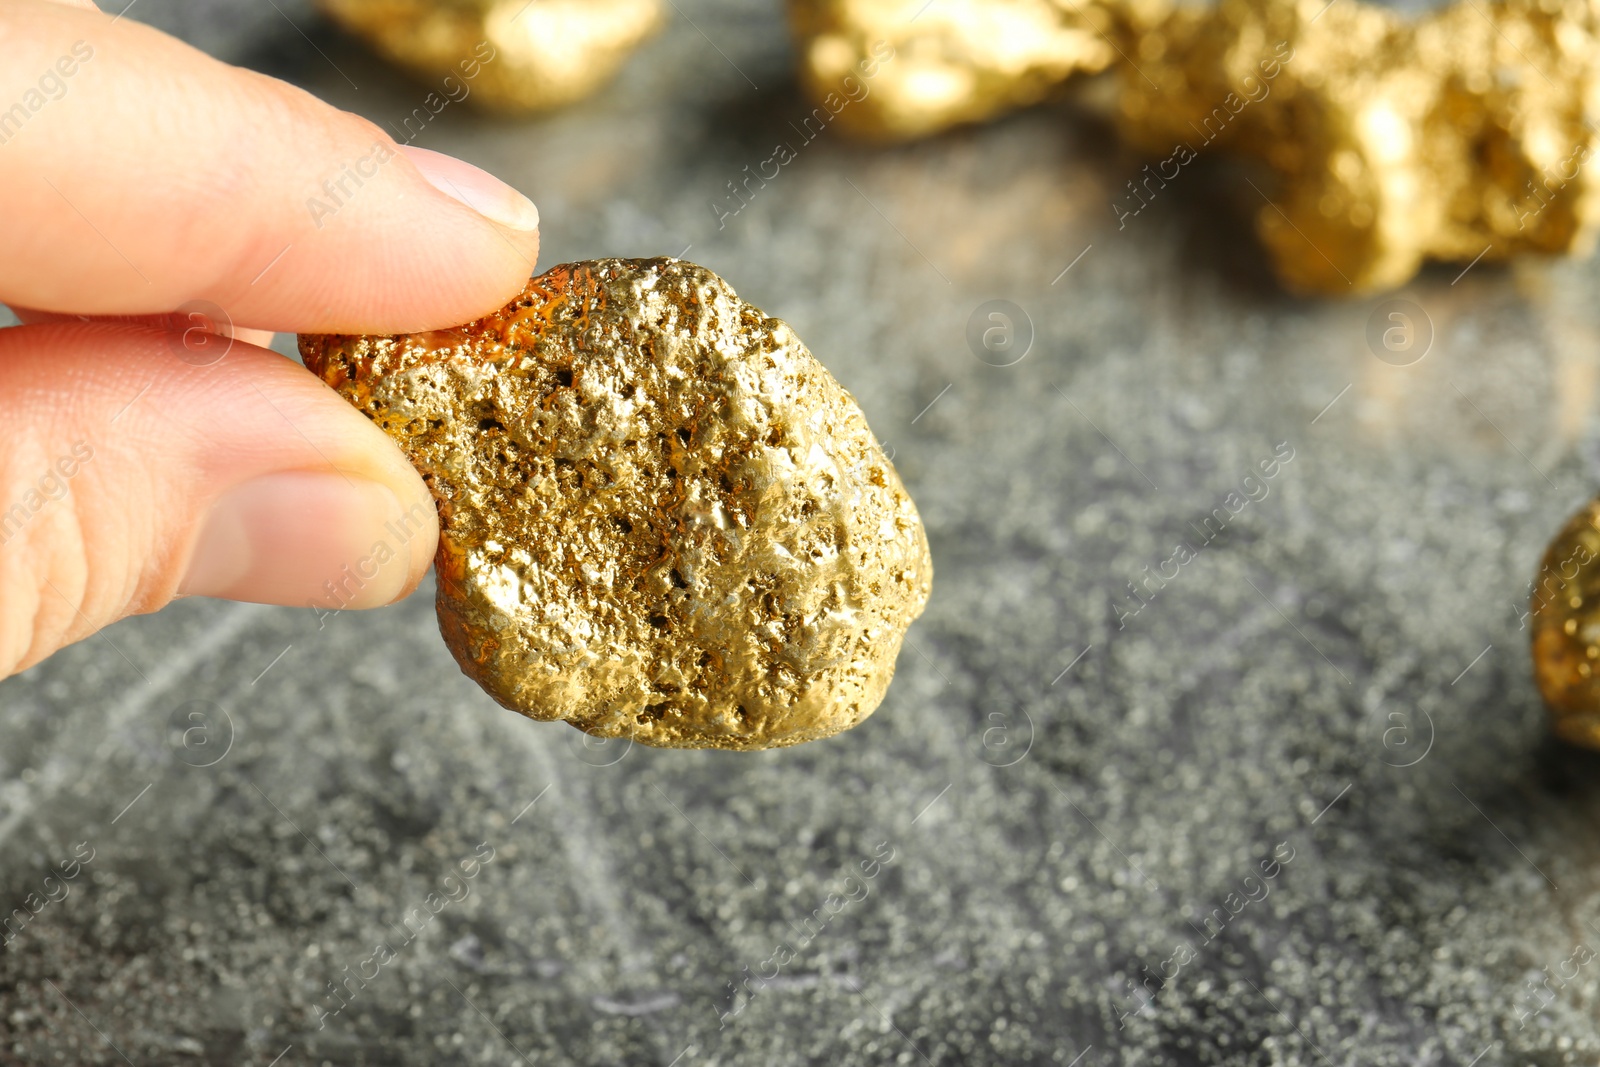 Photo of Woman holding gold nugget at grey textured table, closeup. Space for text